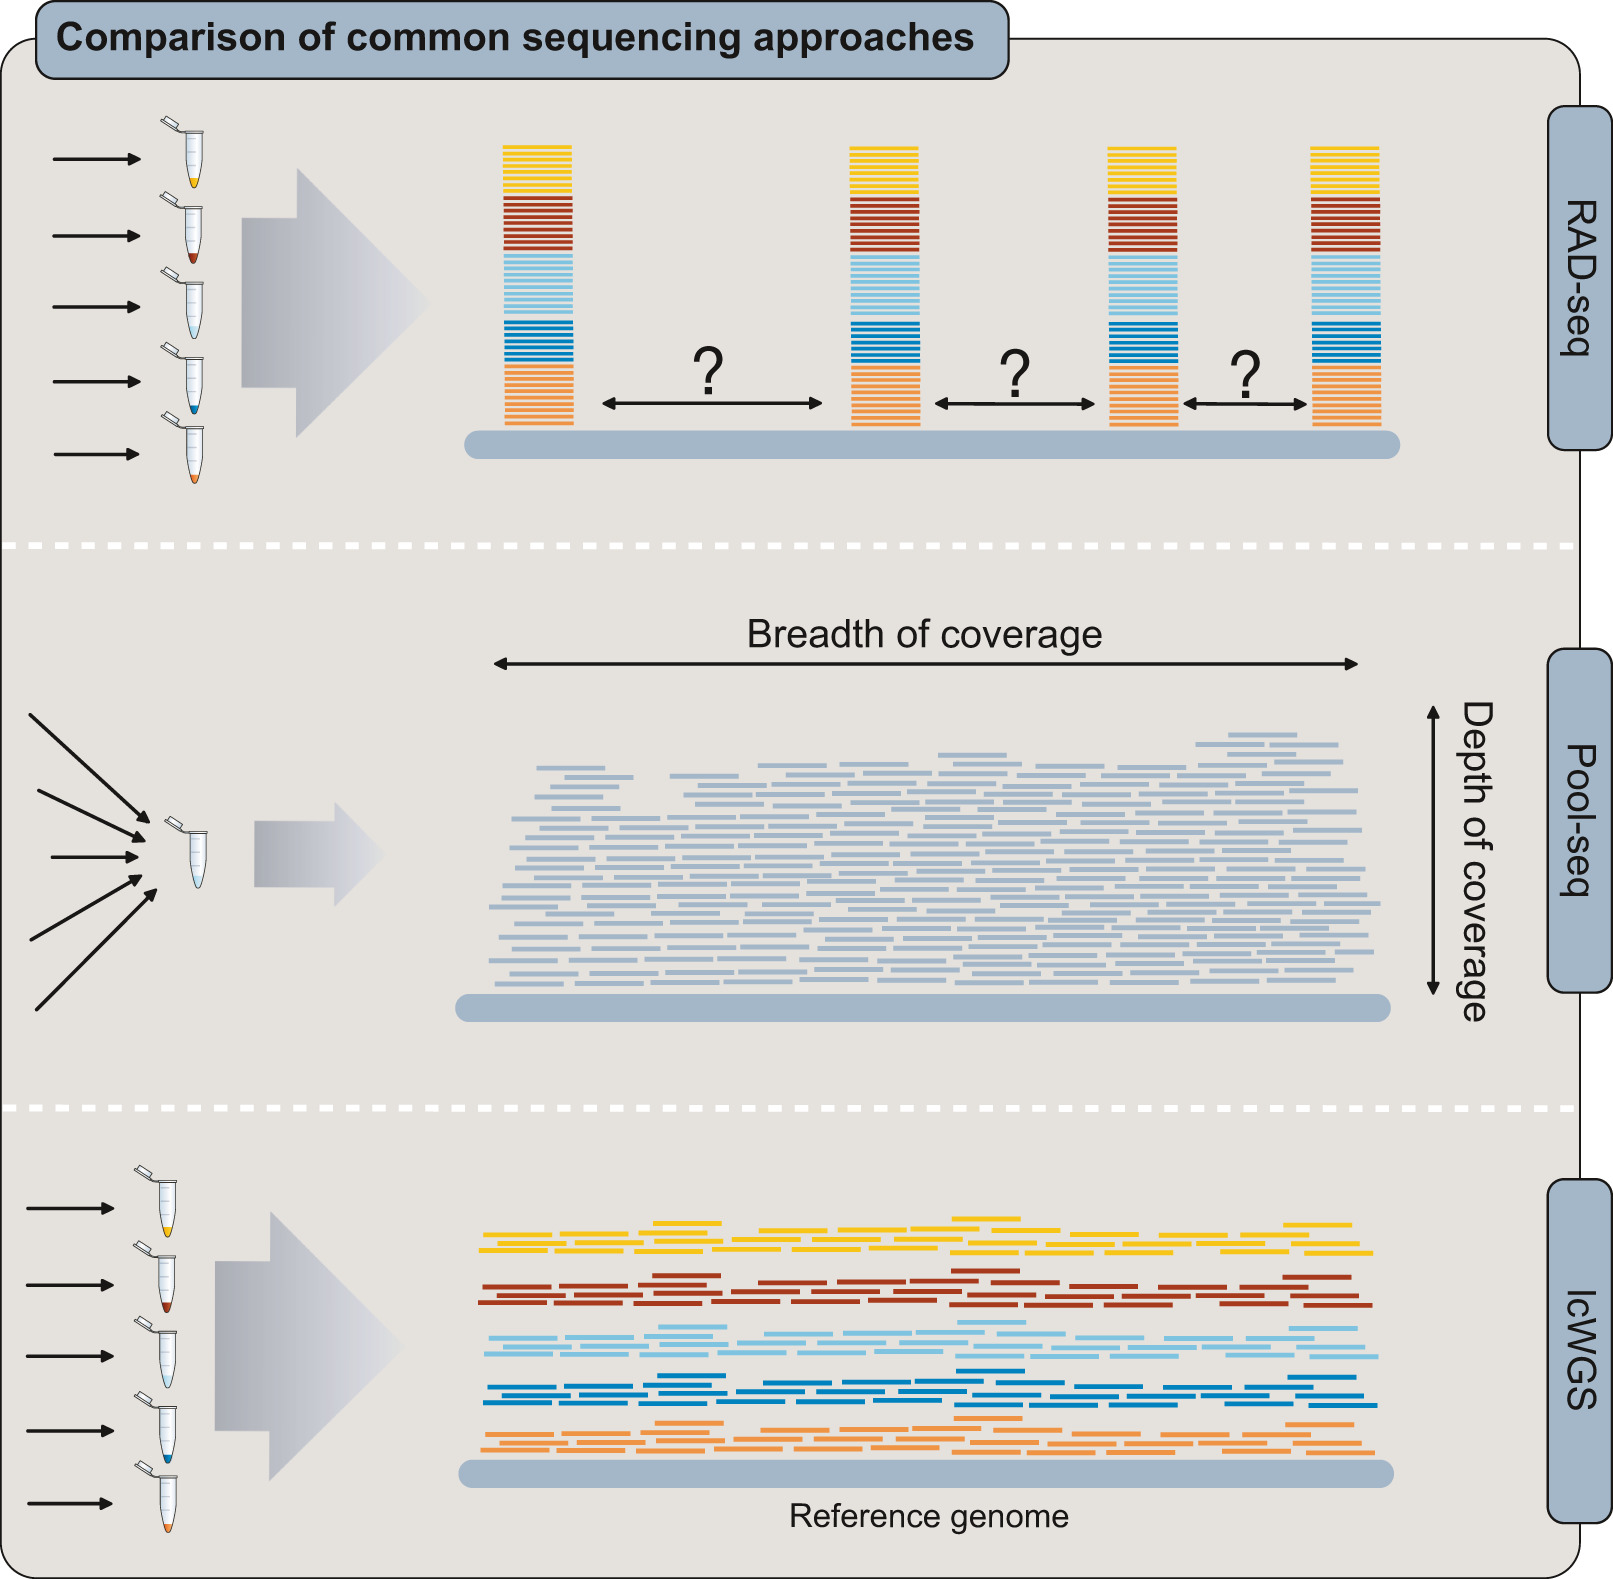 Figure 1 from (Lou et al. 2021) comparing the distribution of sequencing reads mapped to a reference genome.